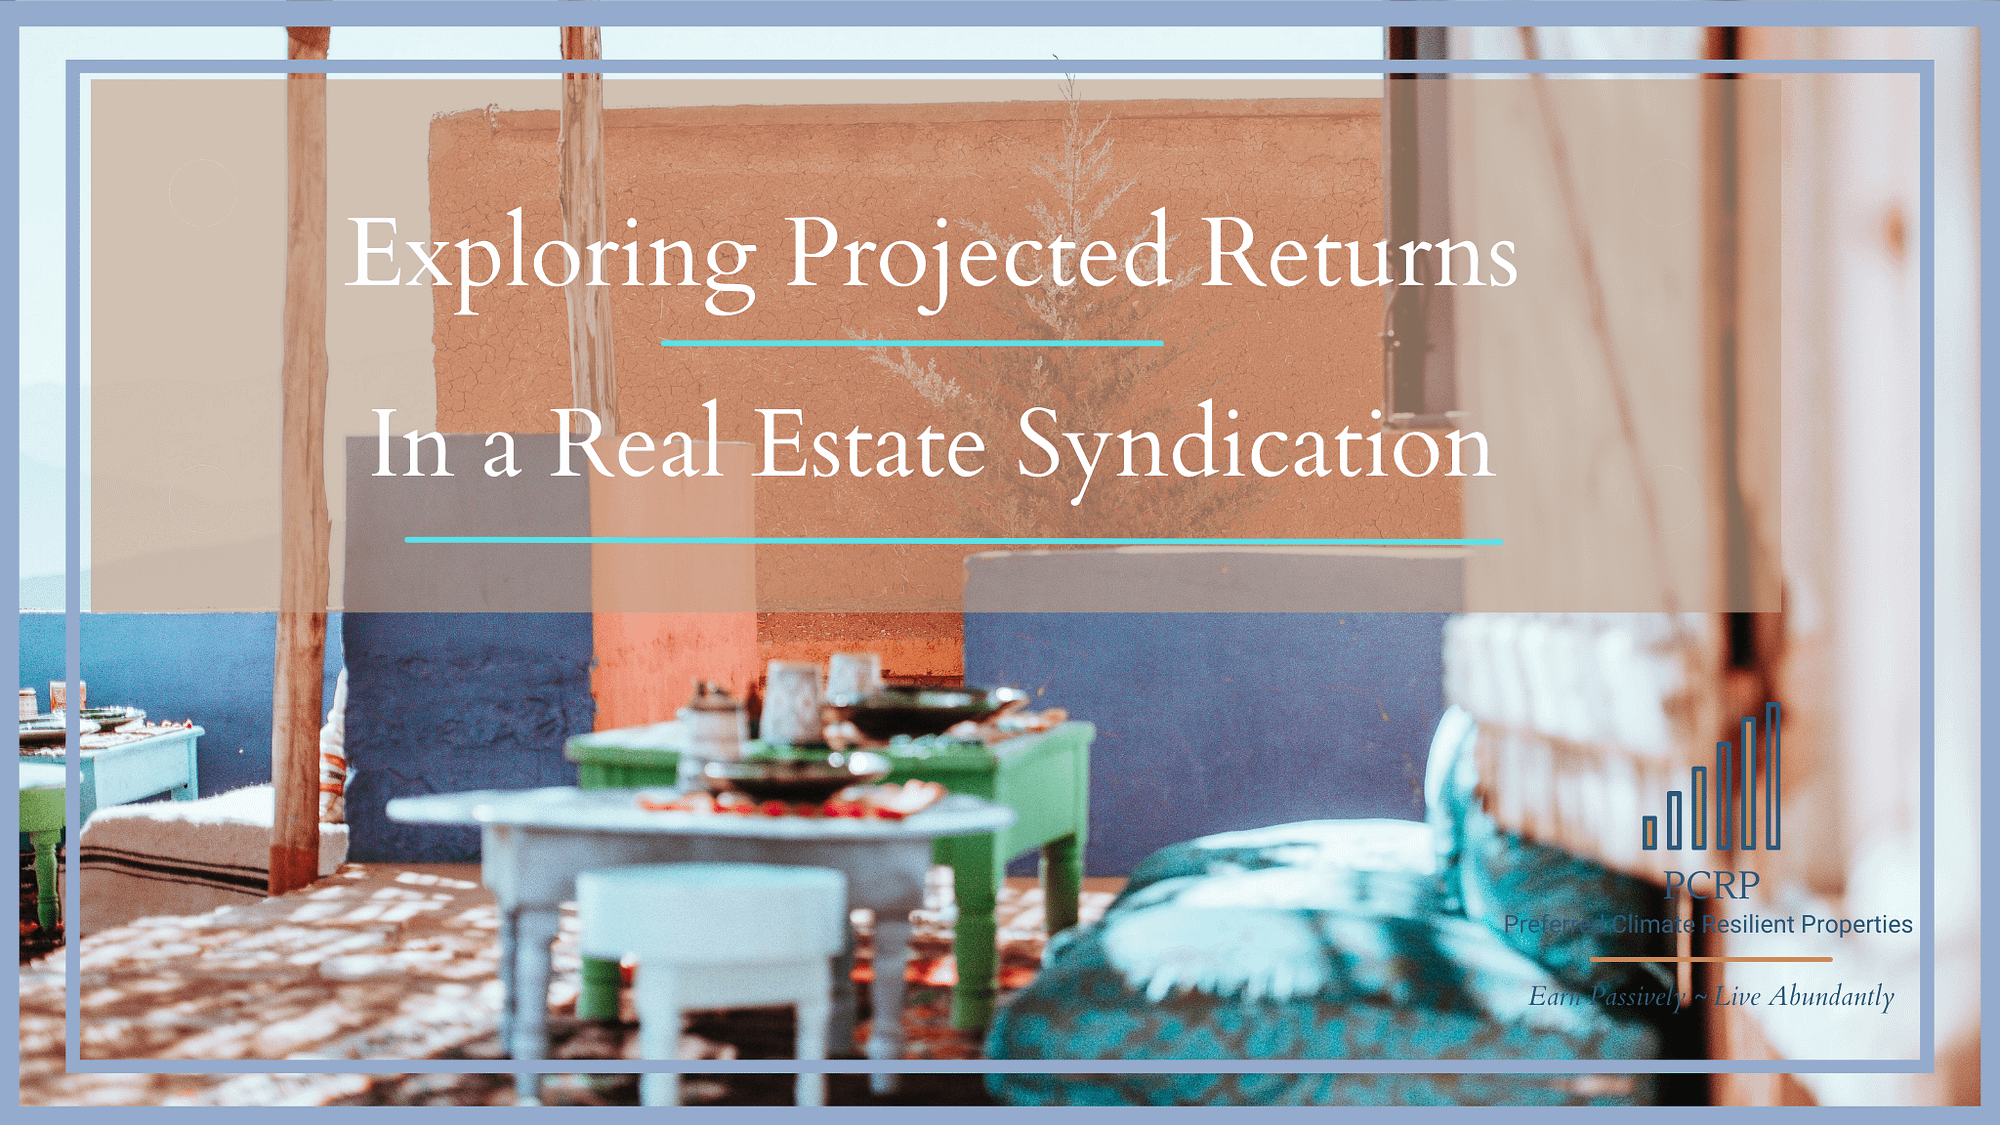 Exploring projected returns in a real estate syndication